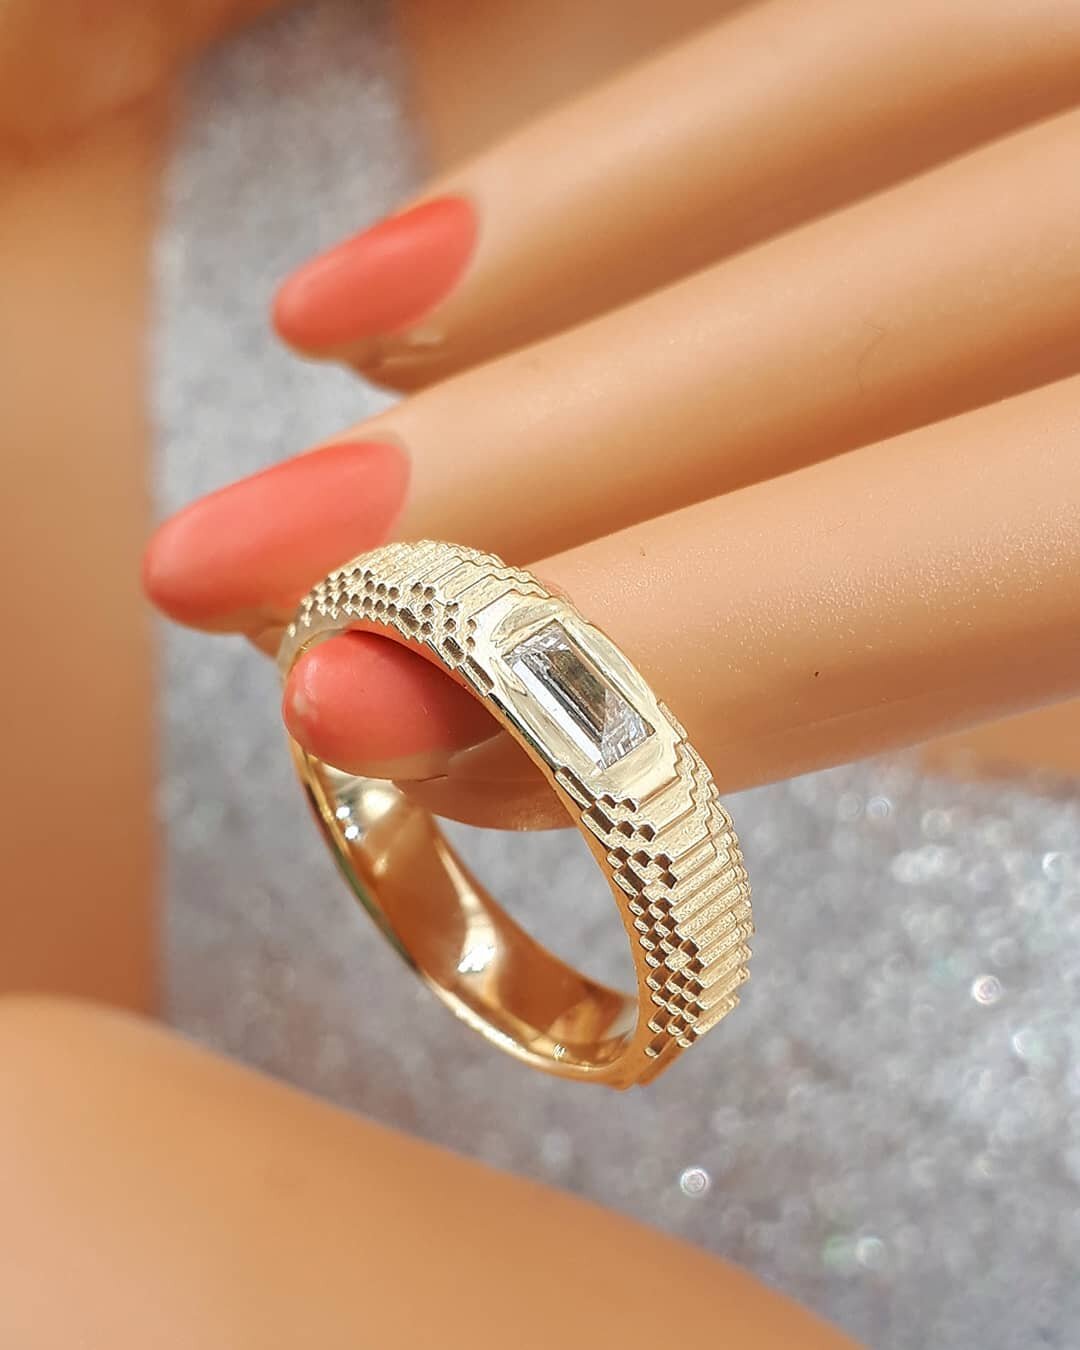 ☆ Glitched gold 5mm ring with a diamond baguette set upside down 🙃☆
.
Now @tomflondon 
.
#solidgold #glitchcore #altbride #altjewels #artjewels #weddingring #mensweddingring  #mensjewelry #unisexjewellery #diamondring #pixel #recycledgold